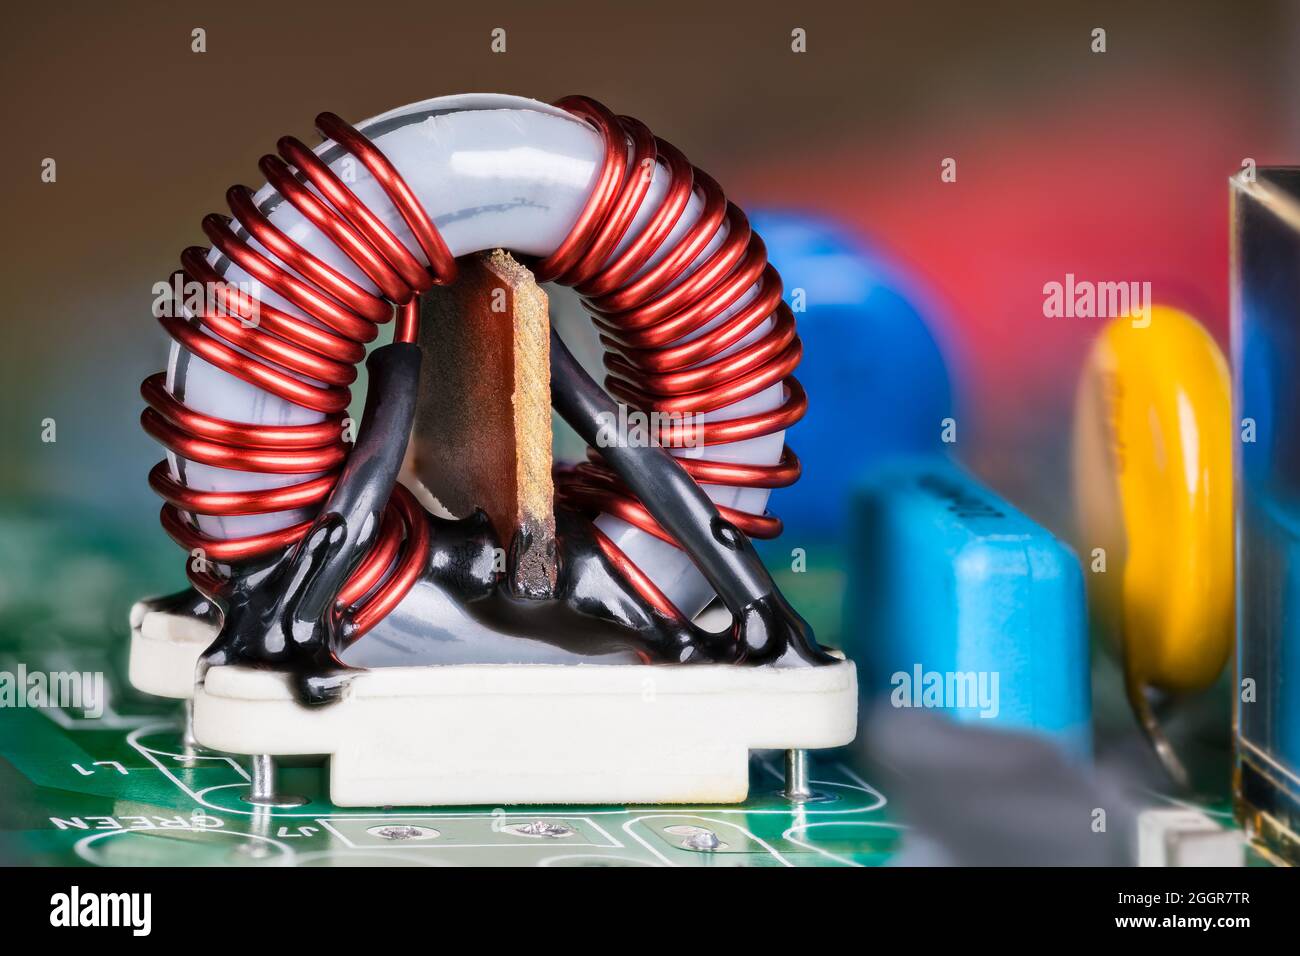 Ferrite core inductor on white holder and colored capacitors on green circuit board. Close-up of electronic toroidal coil with insulated copper wire. Stock Photo